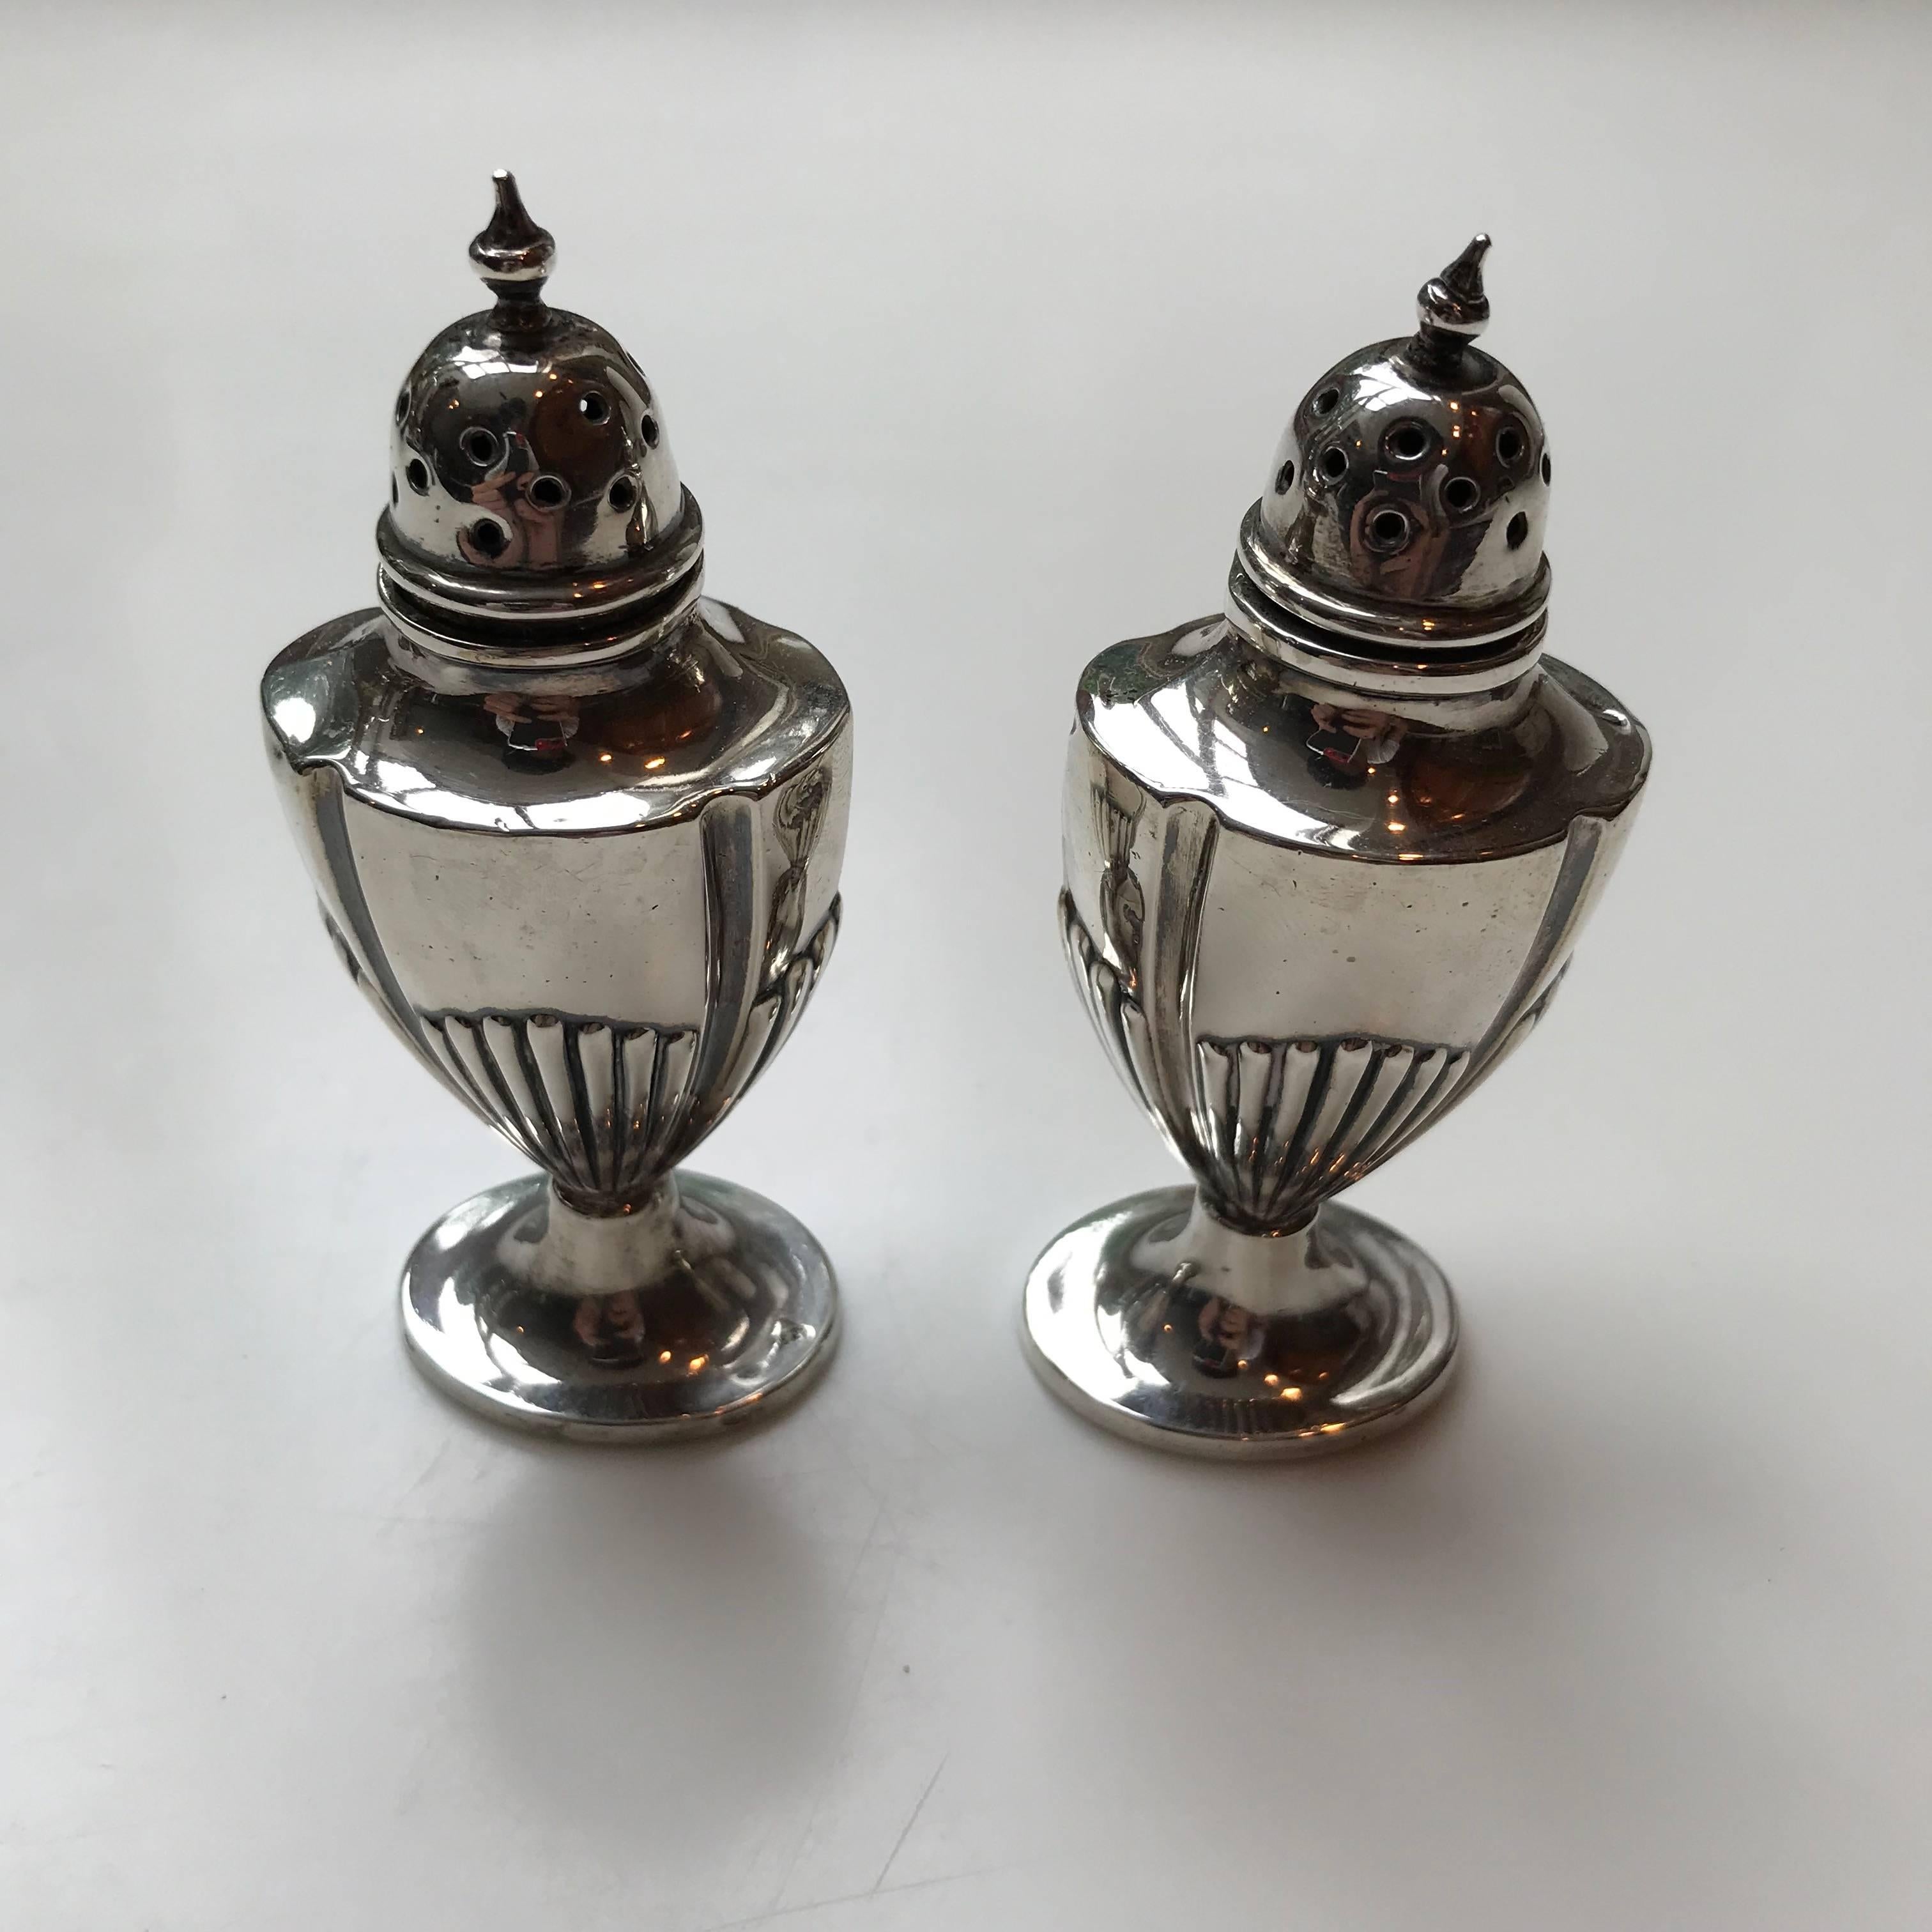 Pair of silver Adam style Pepperettes by Birmingham.